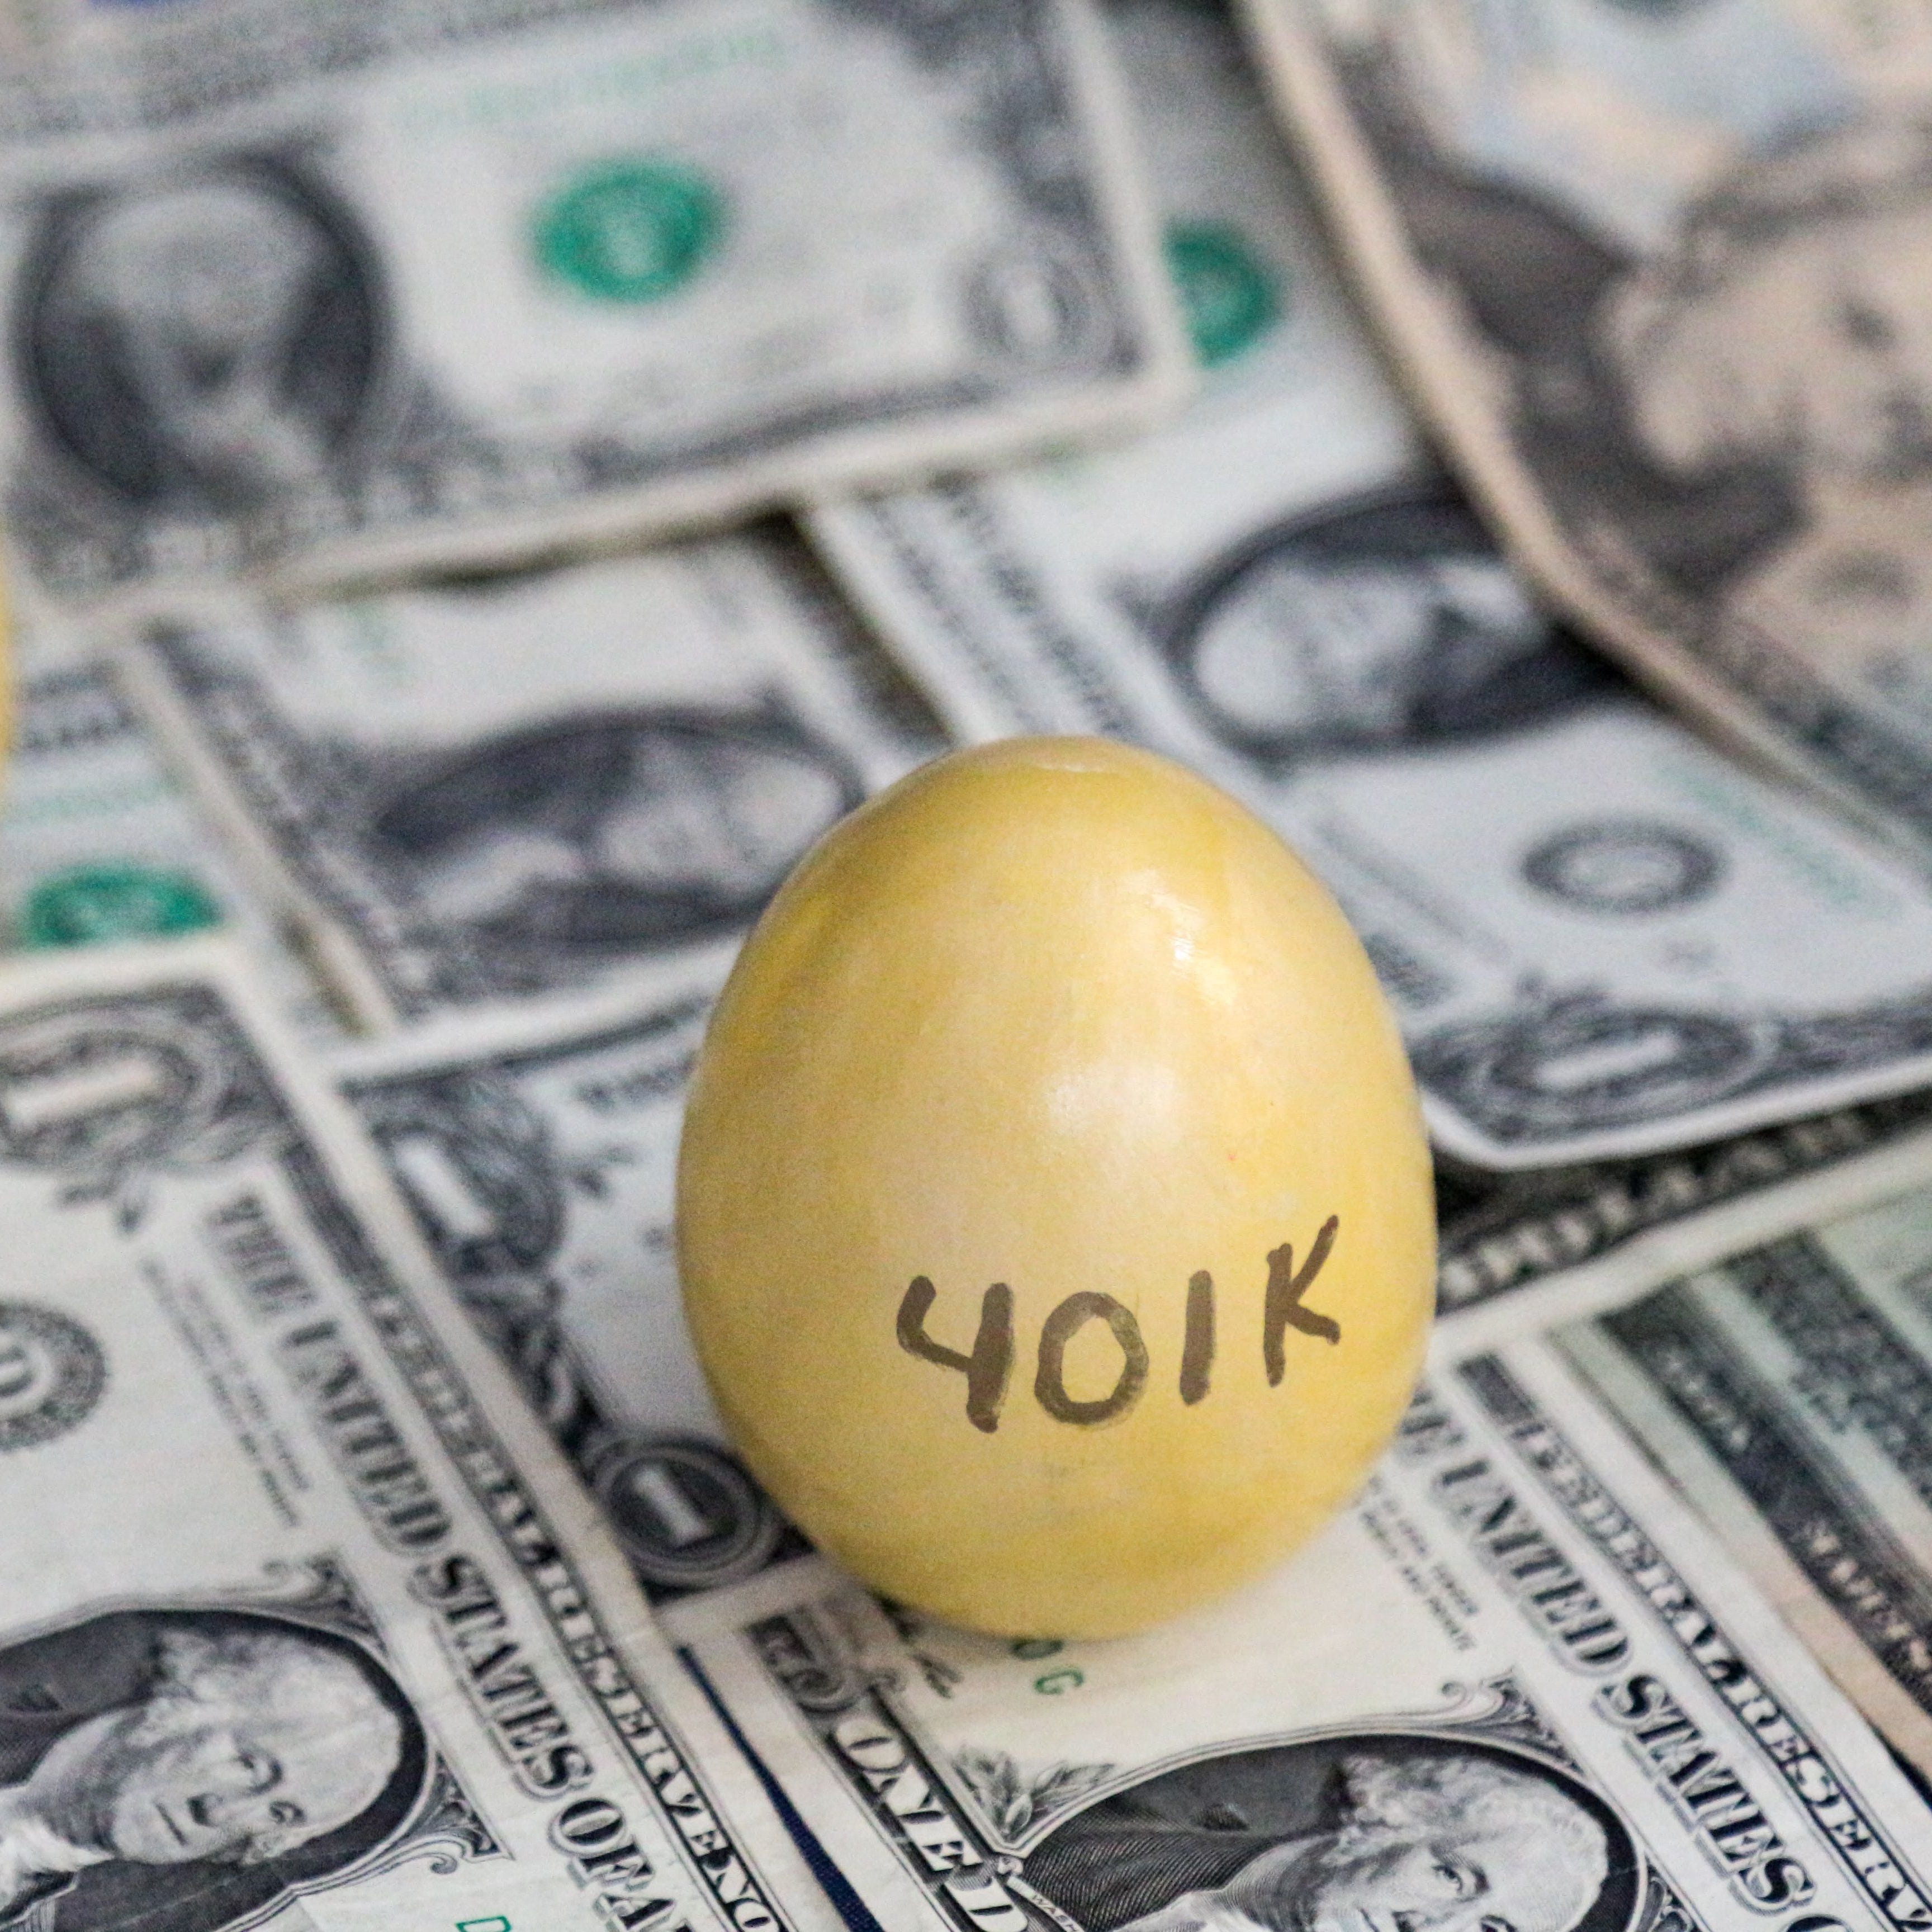 Don't believe everything you hear. Falsehoods — and even following fact-checked 401(k) rules of thumb in every situation — can steer savers off course. Here are five 401(k) rules worth further scrutiny.